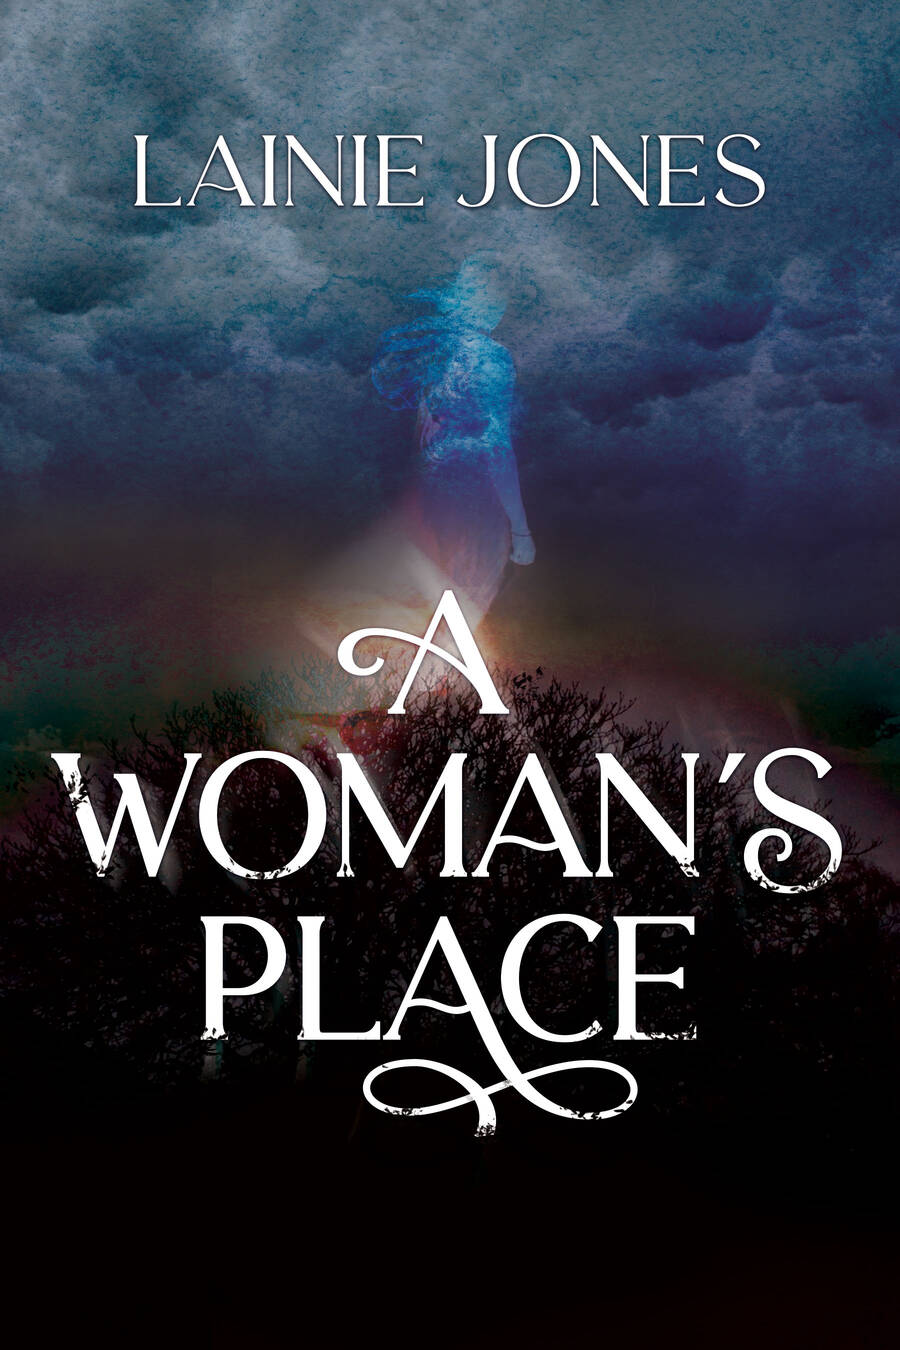 A Womanand39s Place